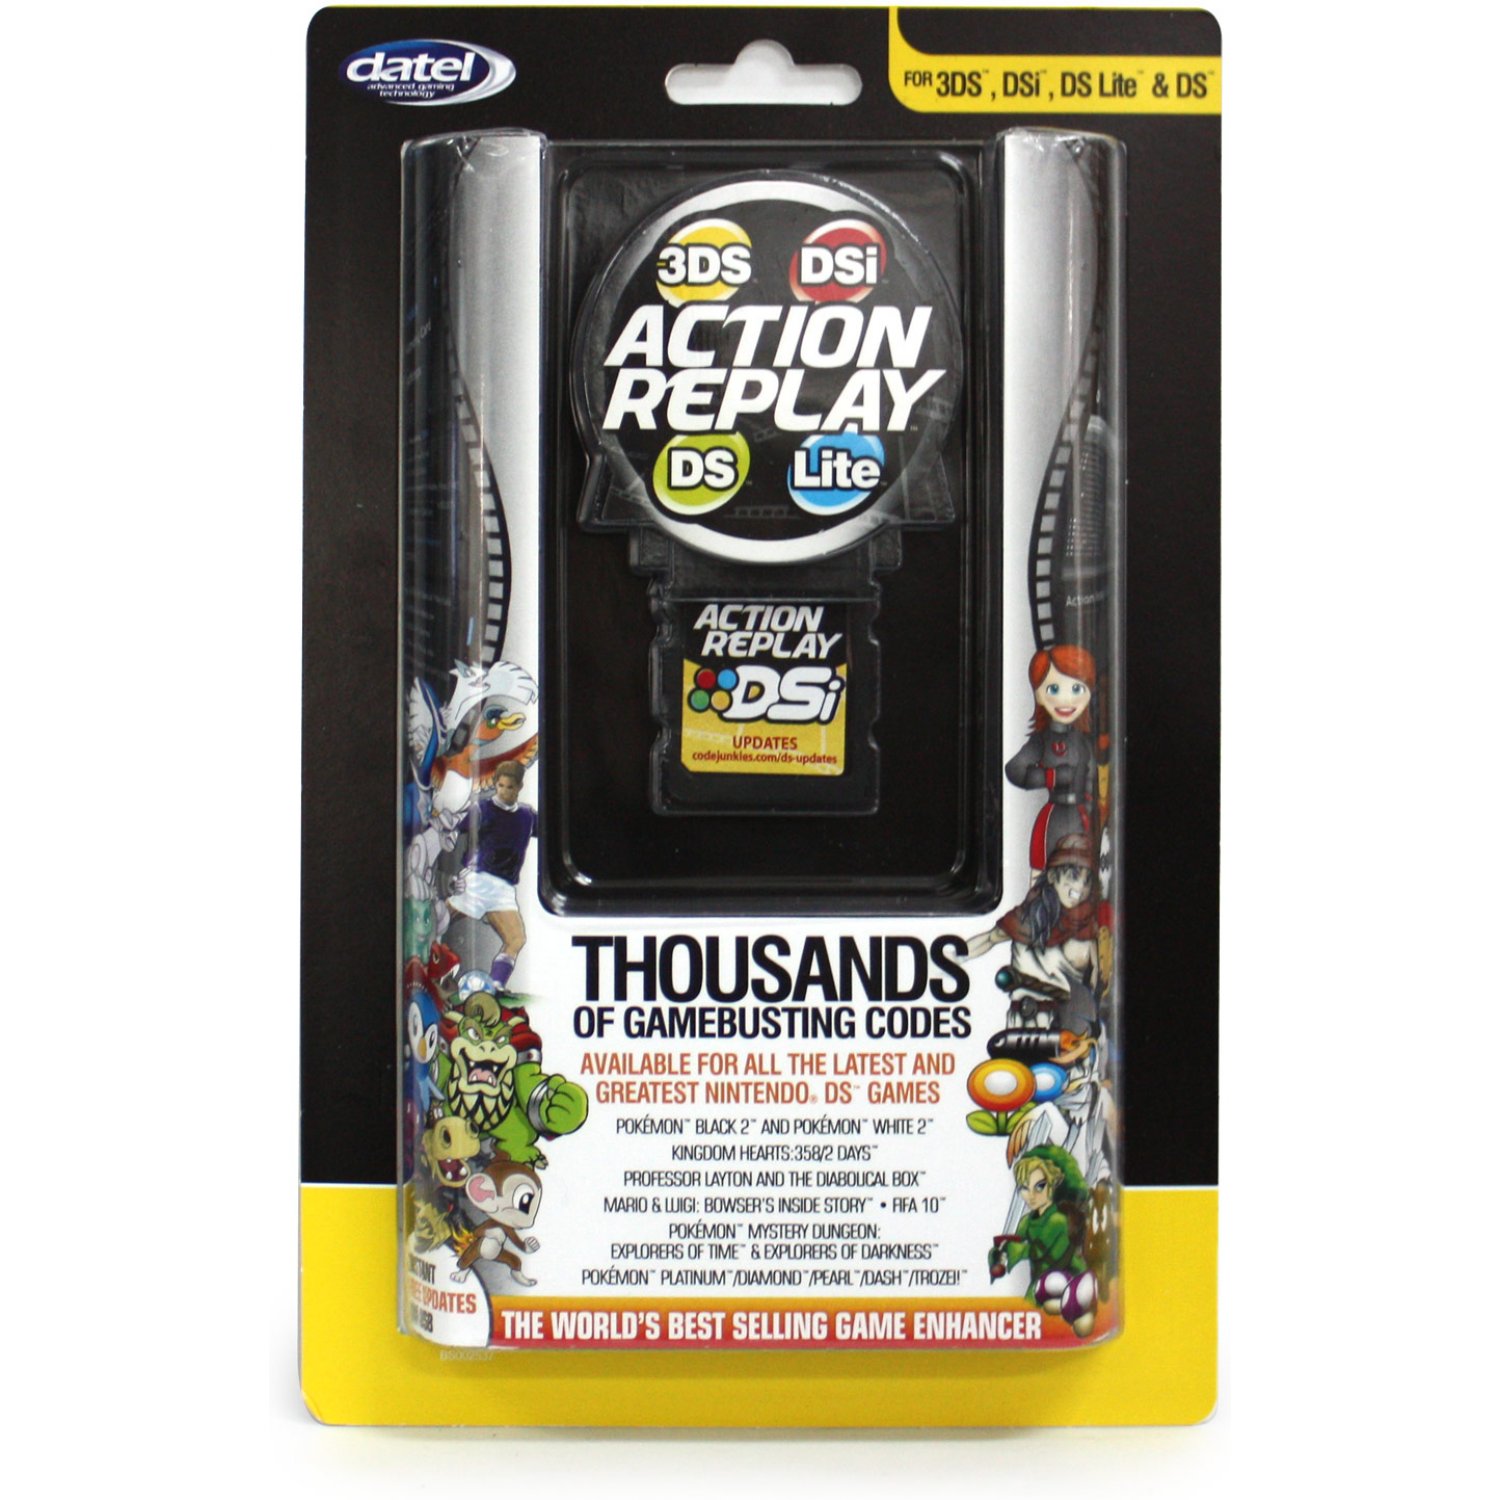 action replay powersaves for 3ds download